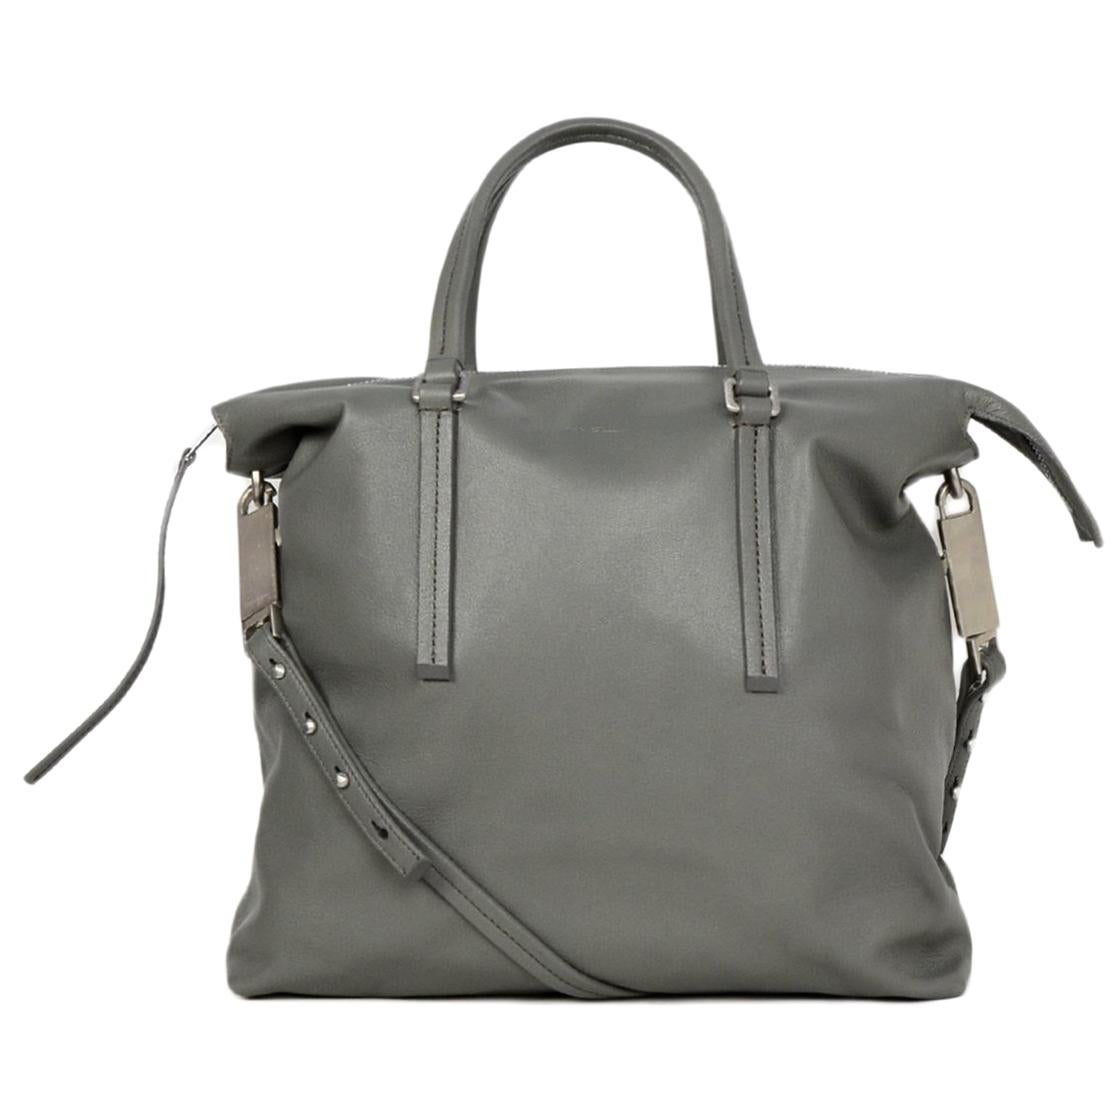 Rick Owens Walrus Grey Leather Tote Bag rt $1, 495